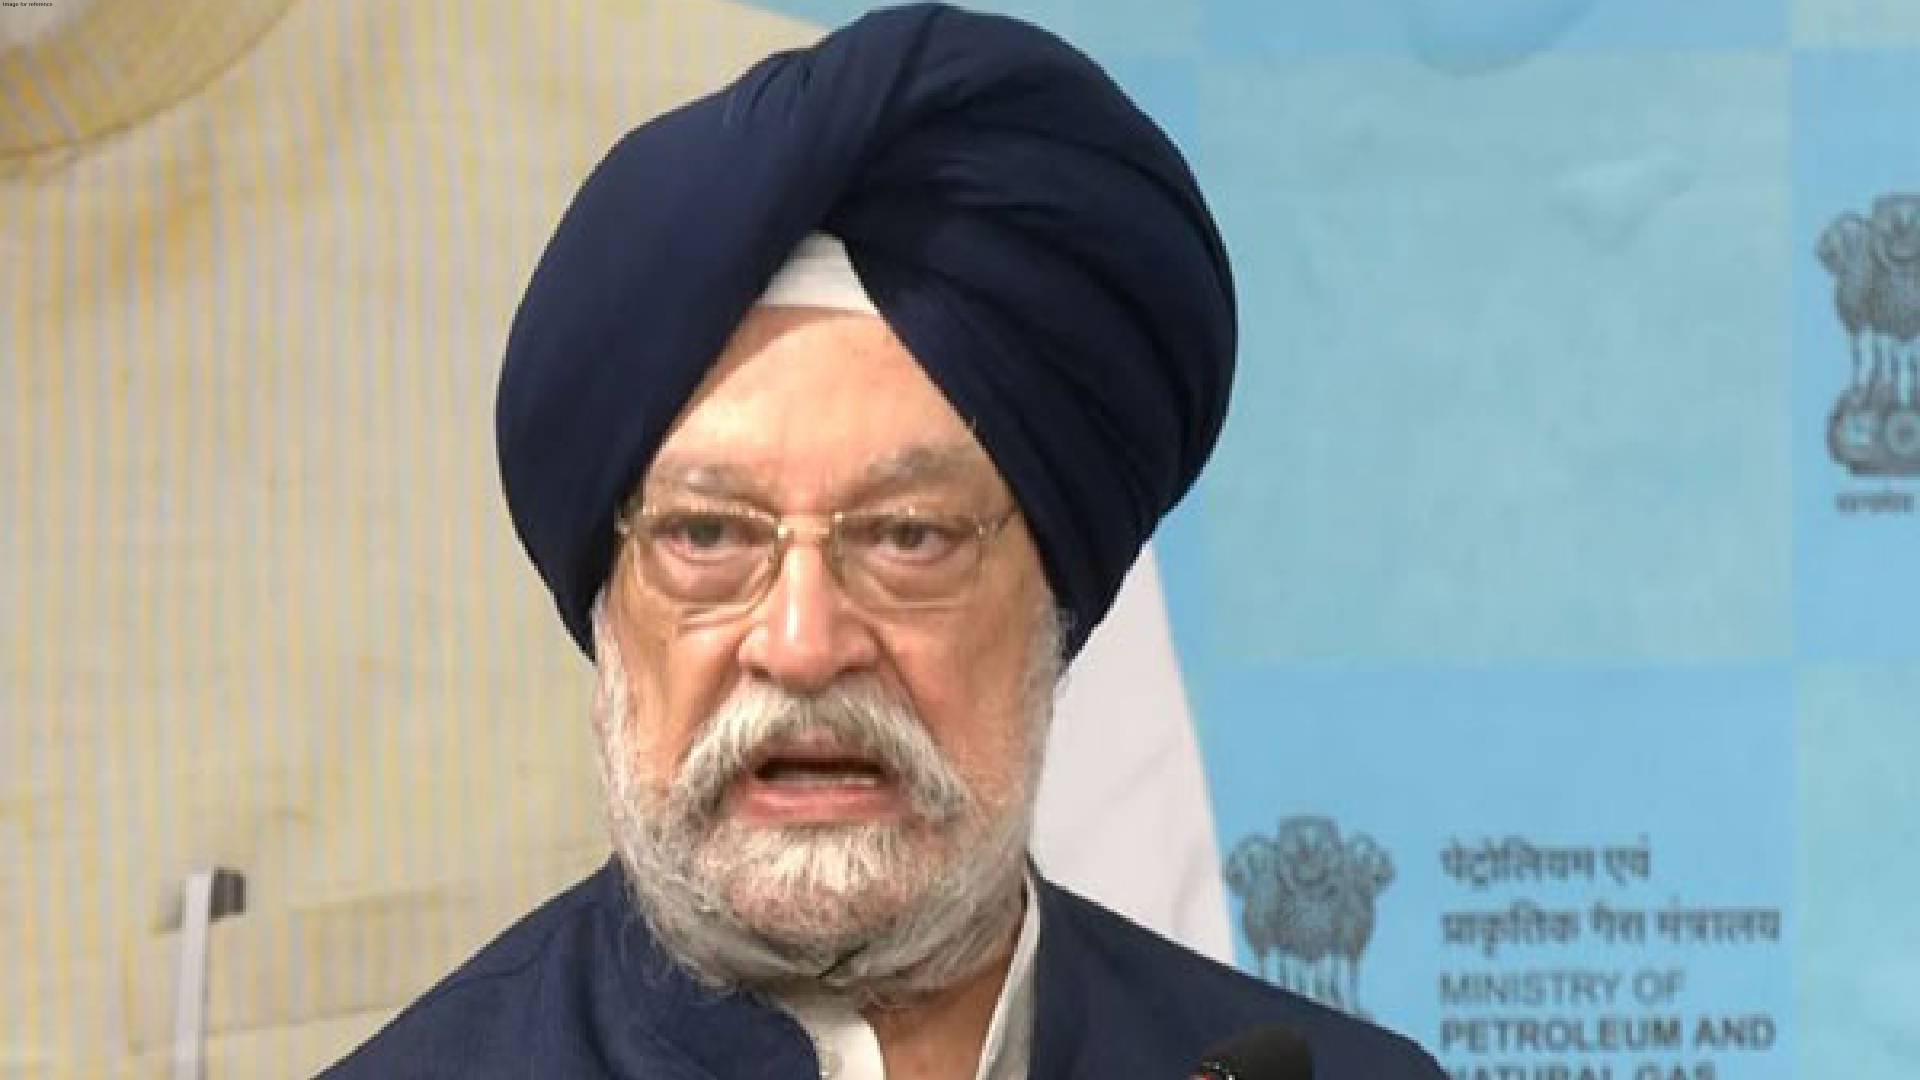 Our policy of 'nation first' helped manage oil prices despite global conflicts: Hardeep Puri